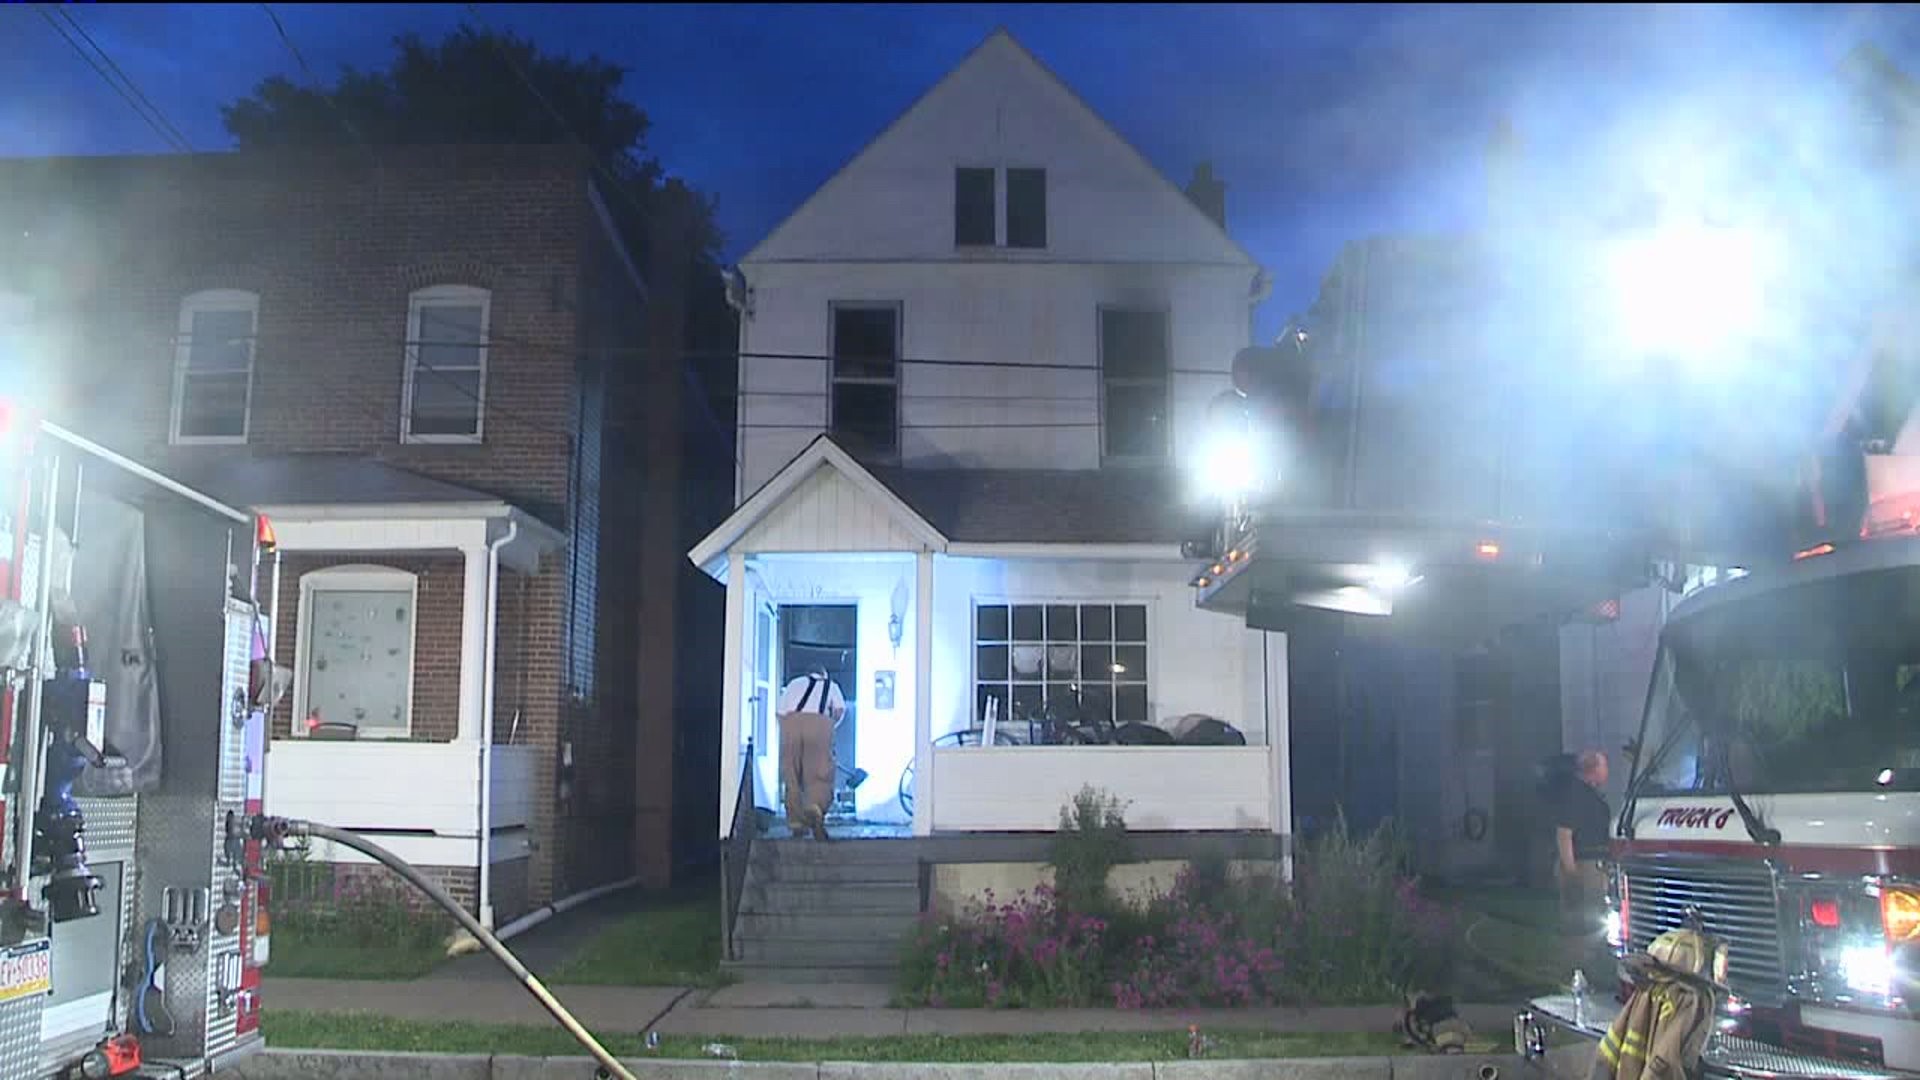 Flames Damage Home in Wilkes-Barre